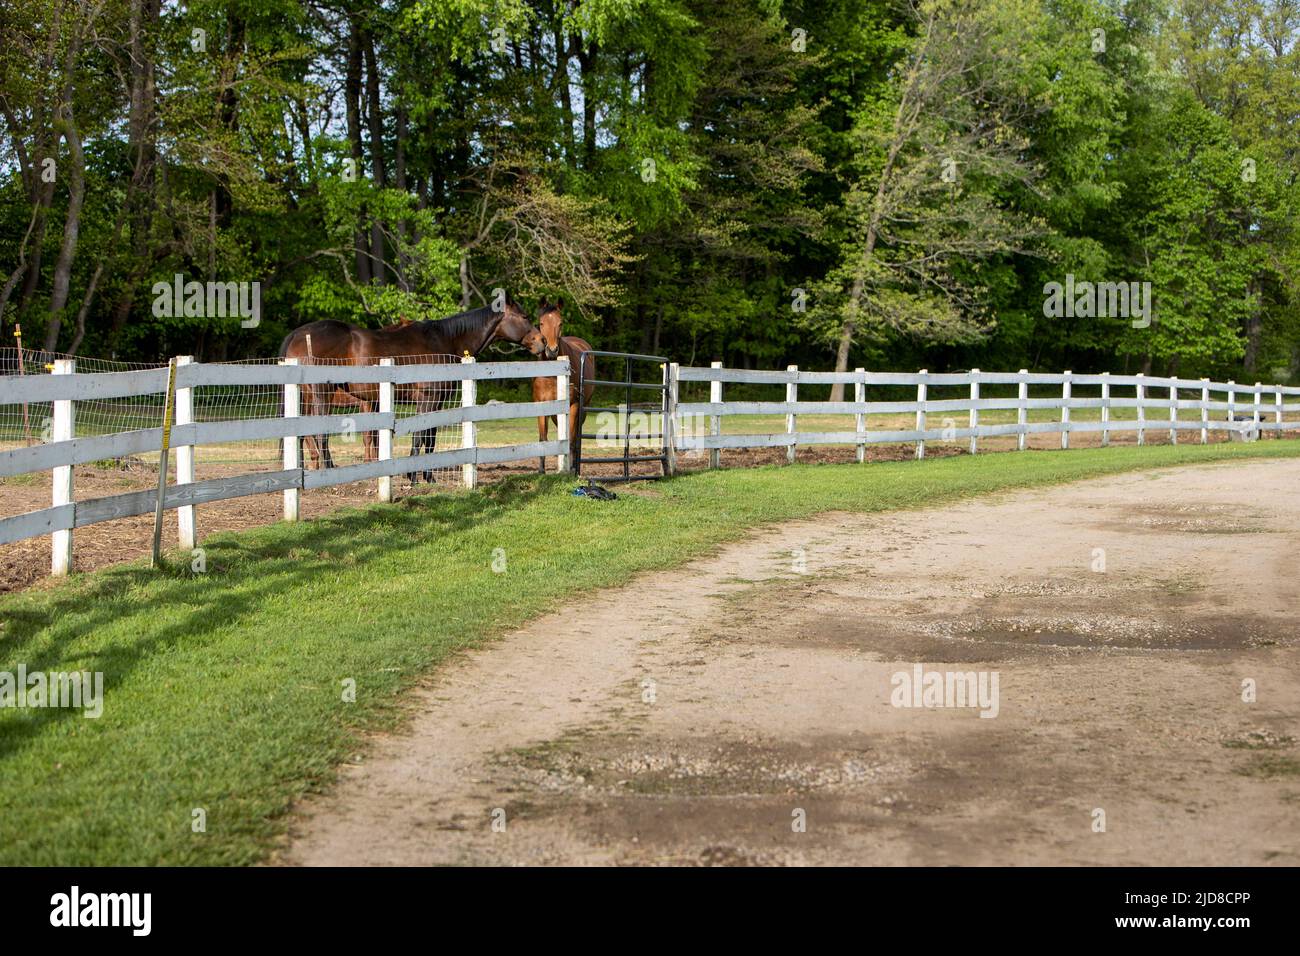 Two affectionate horses at a horse farm. Stock Photo